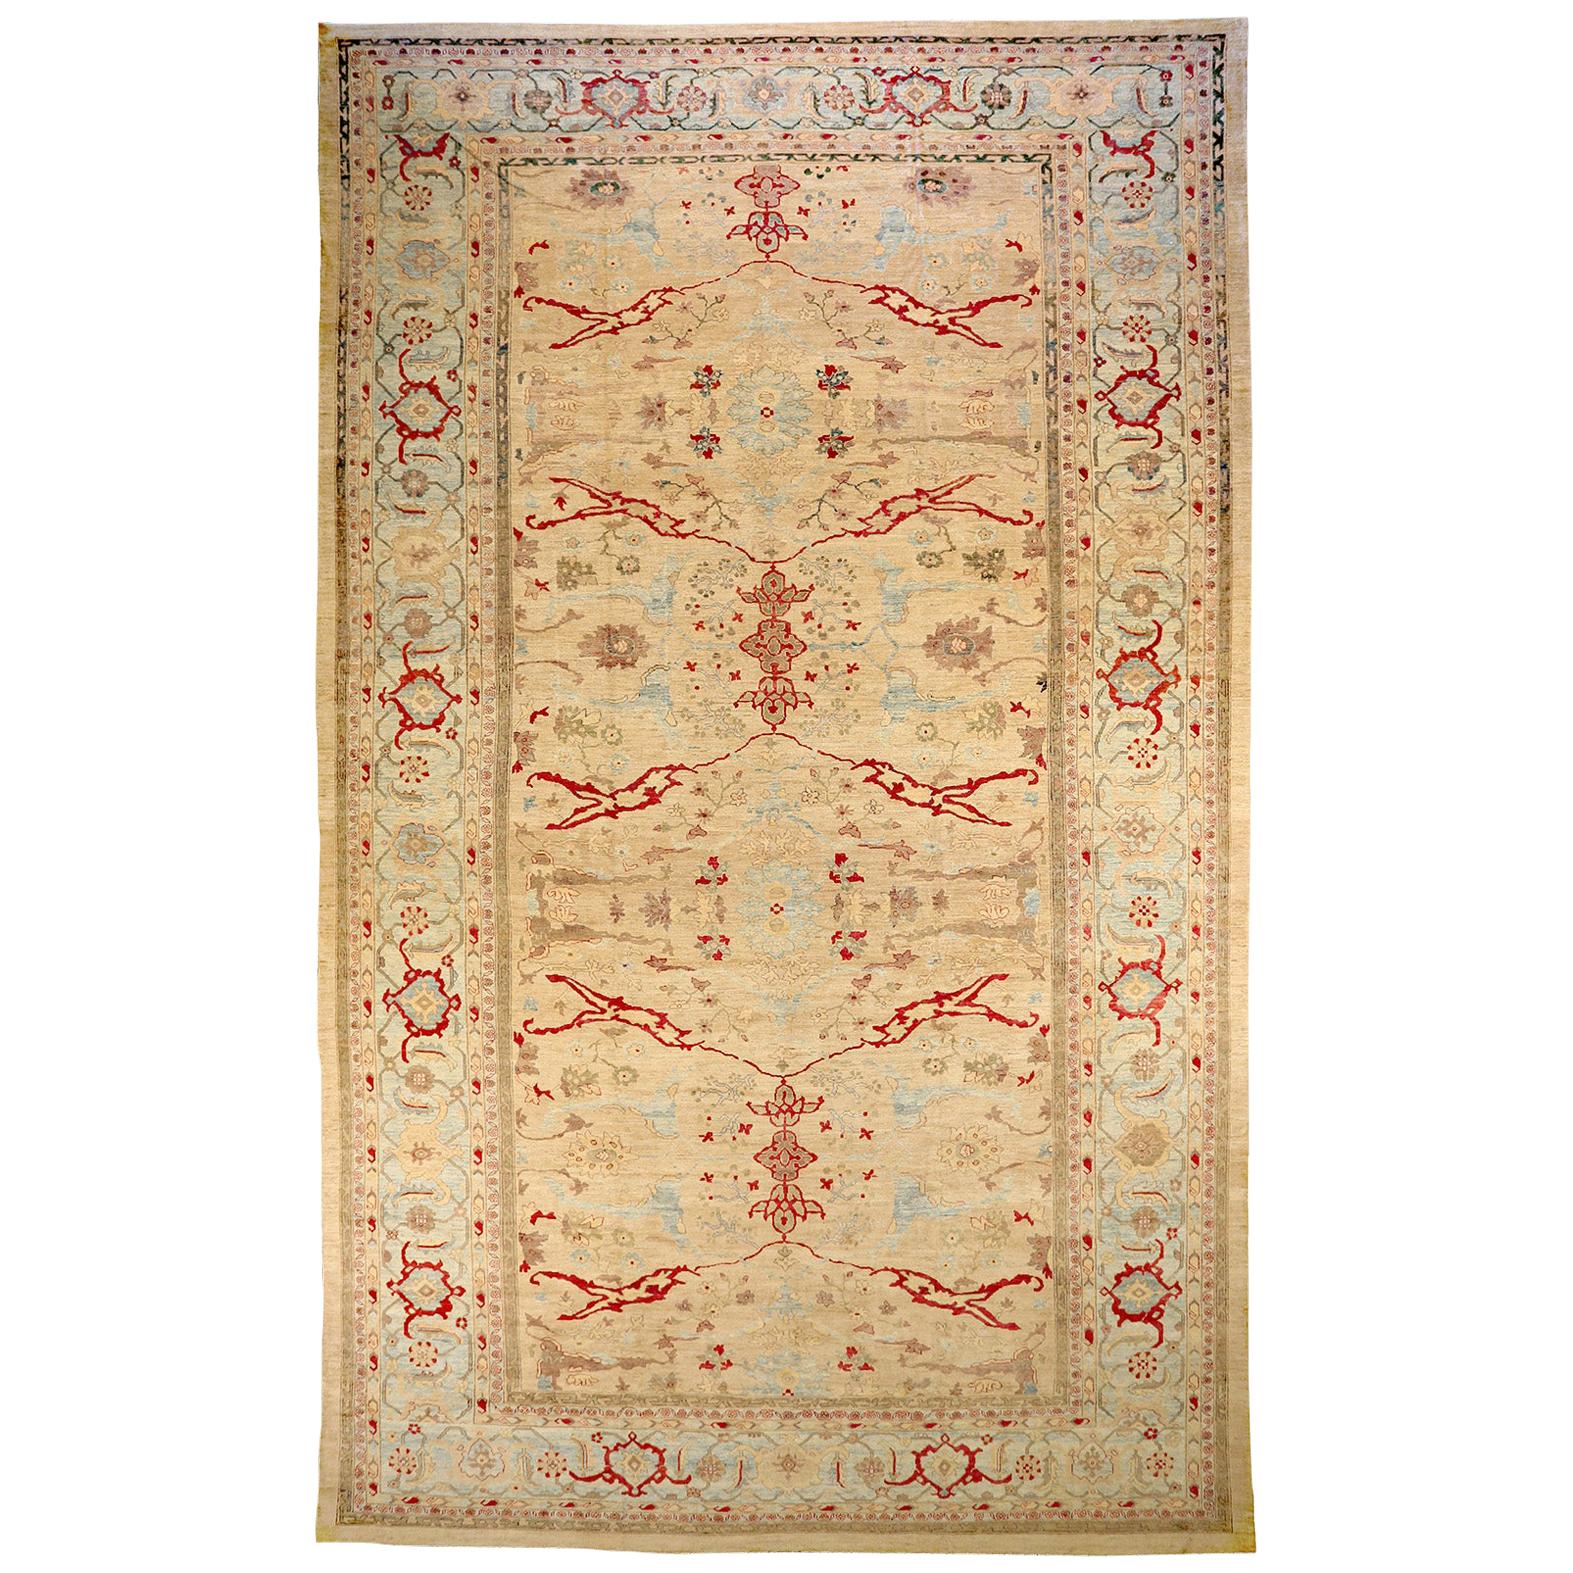 Oversize Contemporary Turkish Sultanabad Style Rug with Gray & Red Floral Motifs